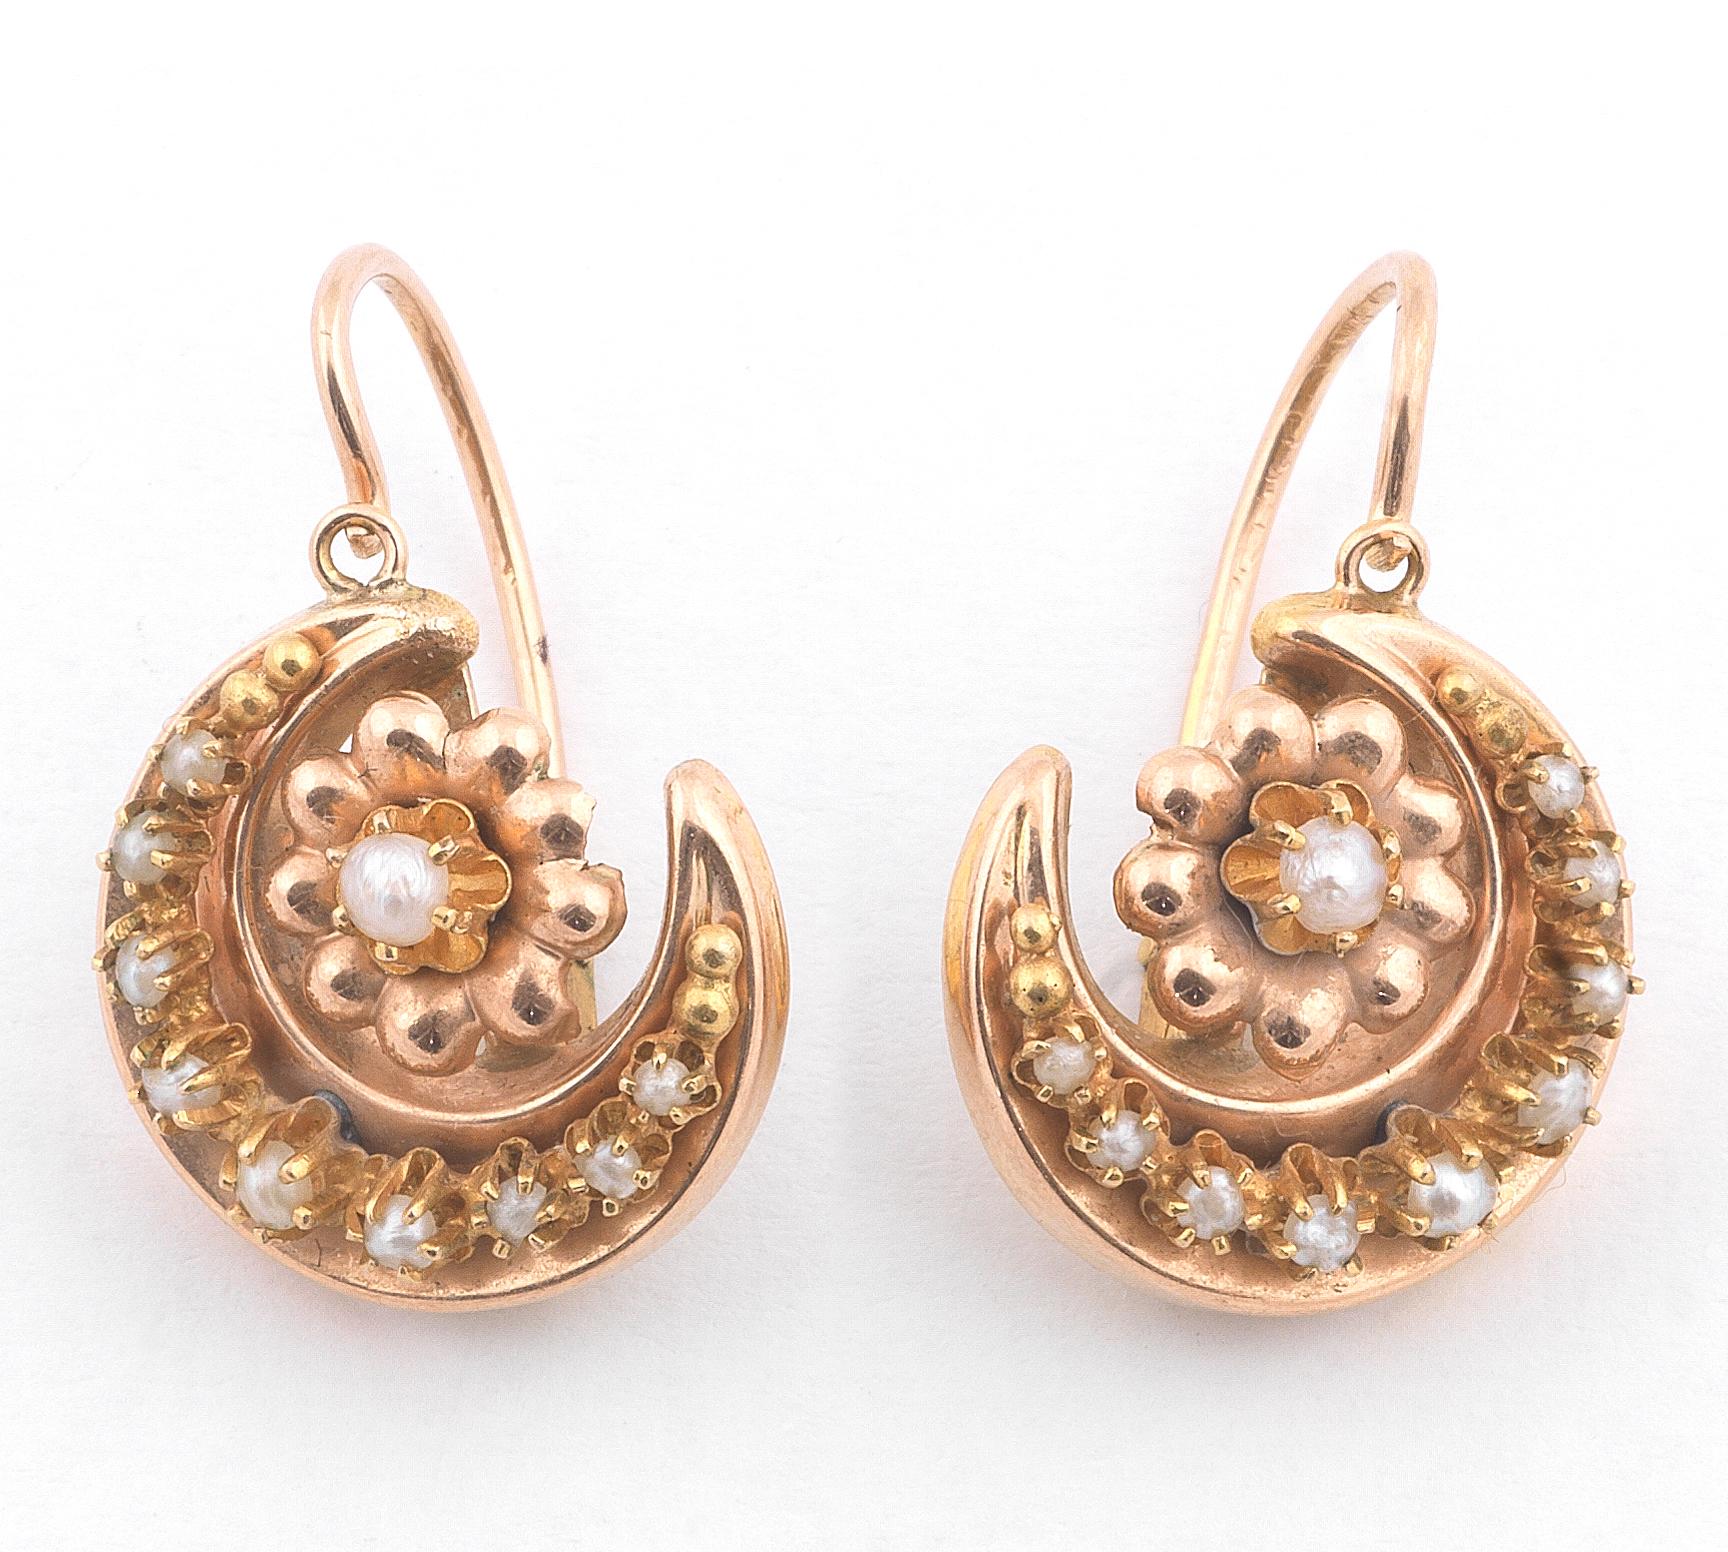 Victorian Antique Gold and Pearl Earrings